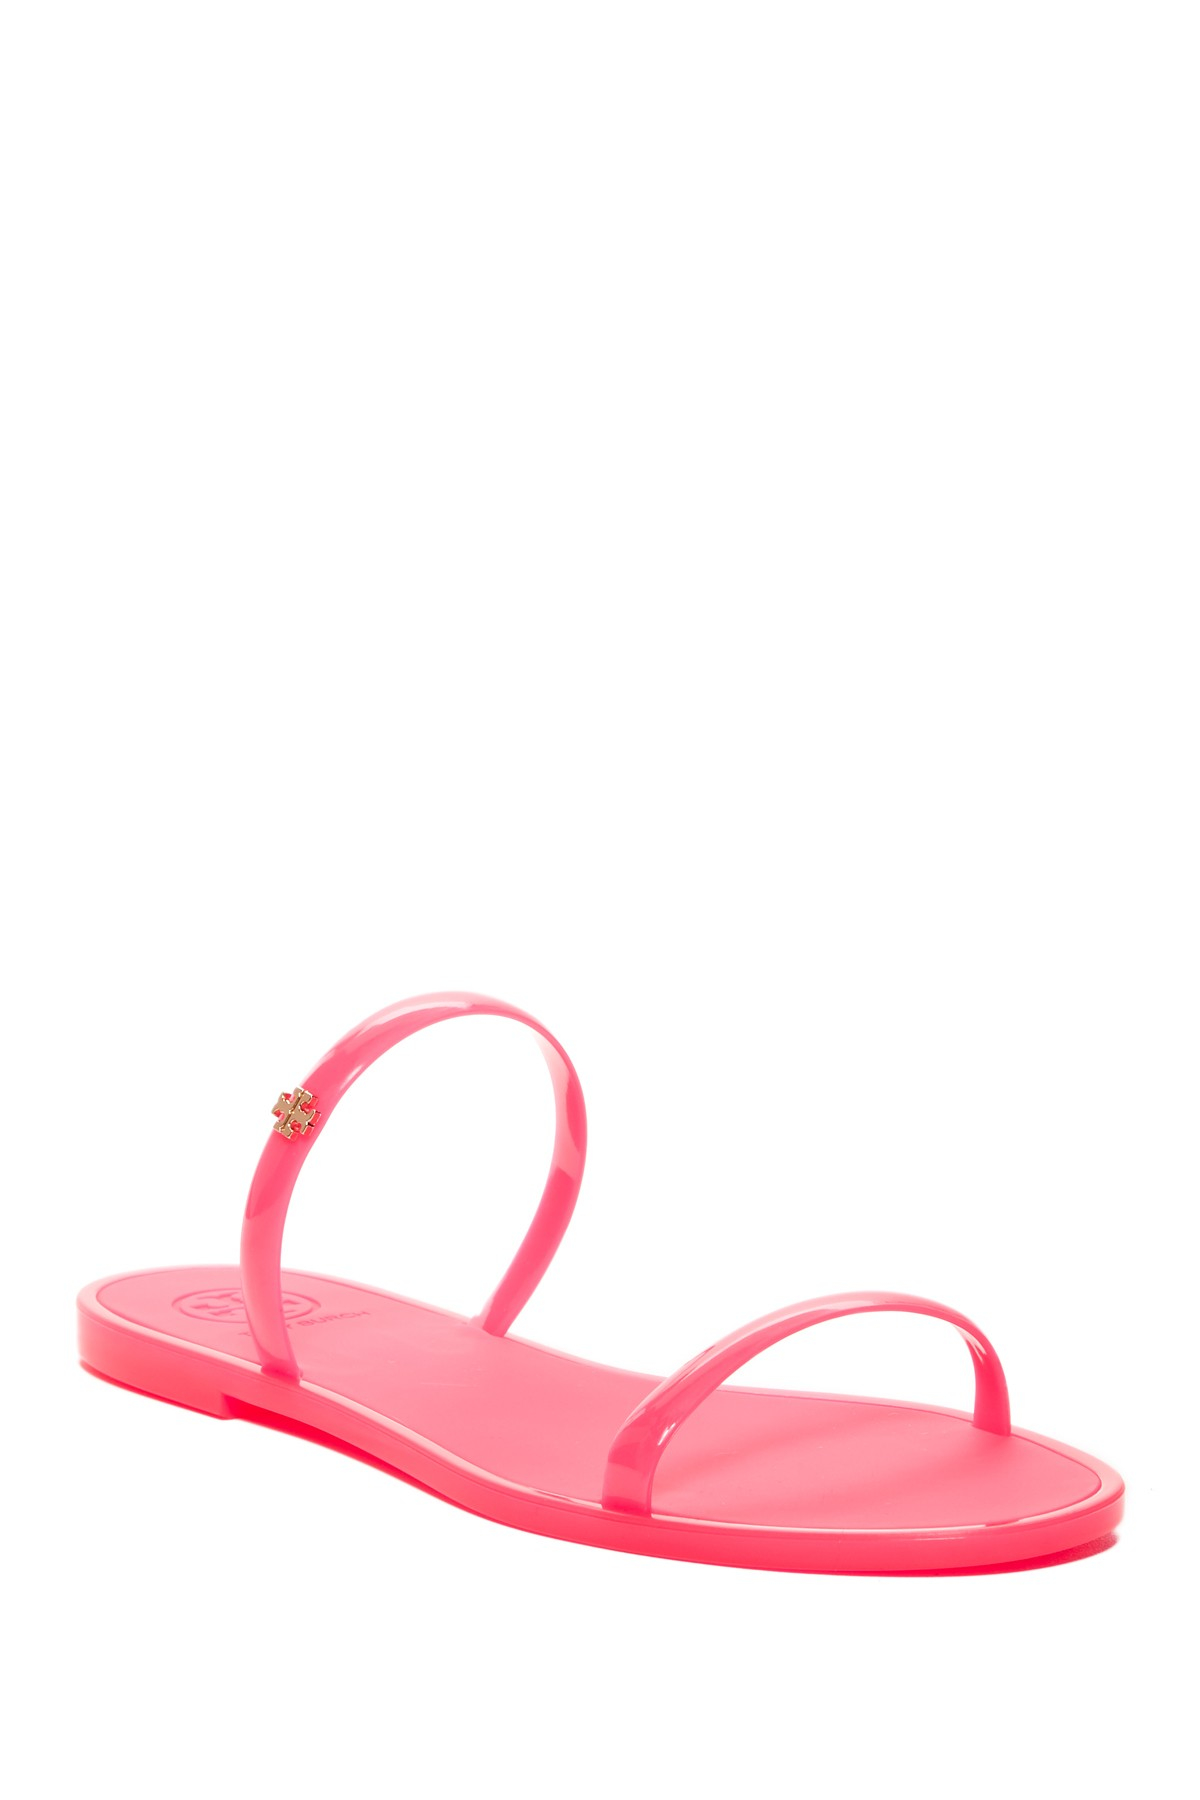 Lyst - Tory Burch Jelly Sandal in Pink